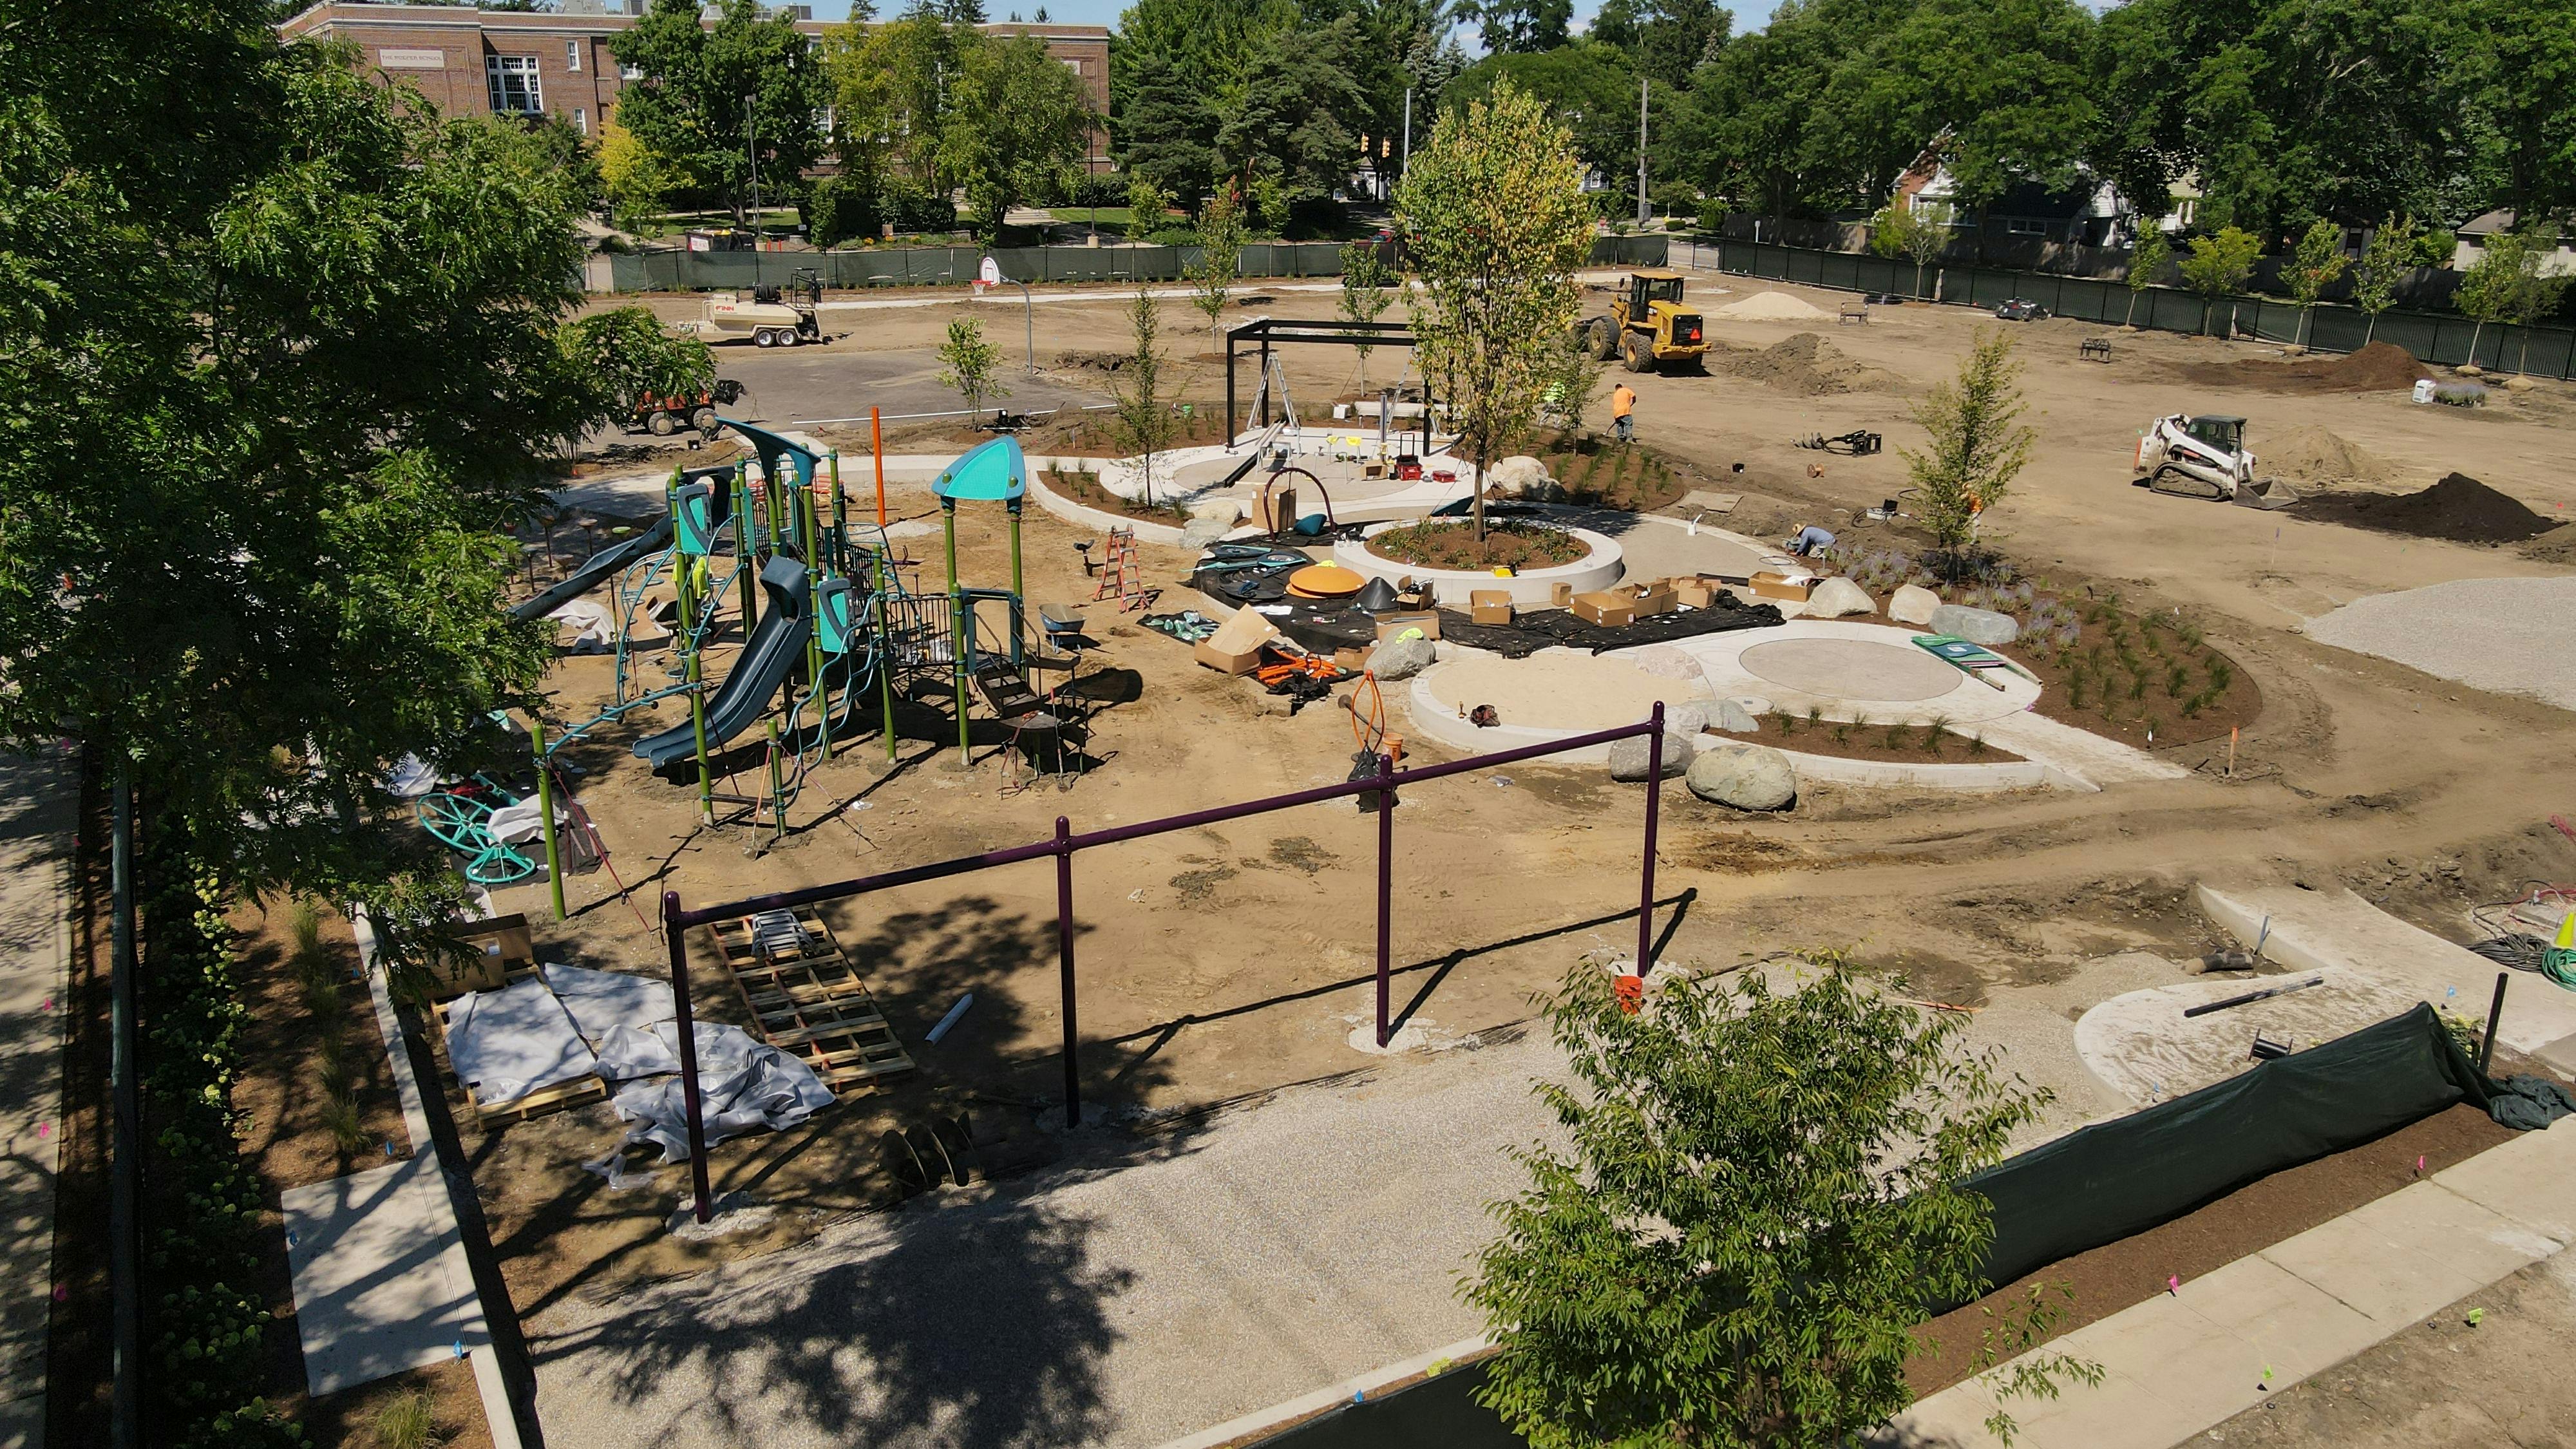 What a change!  Playground going up!